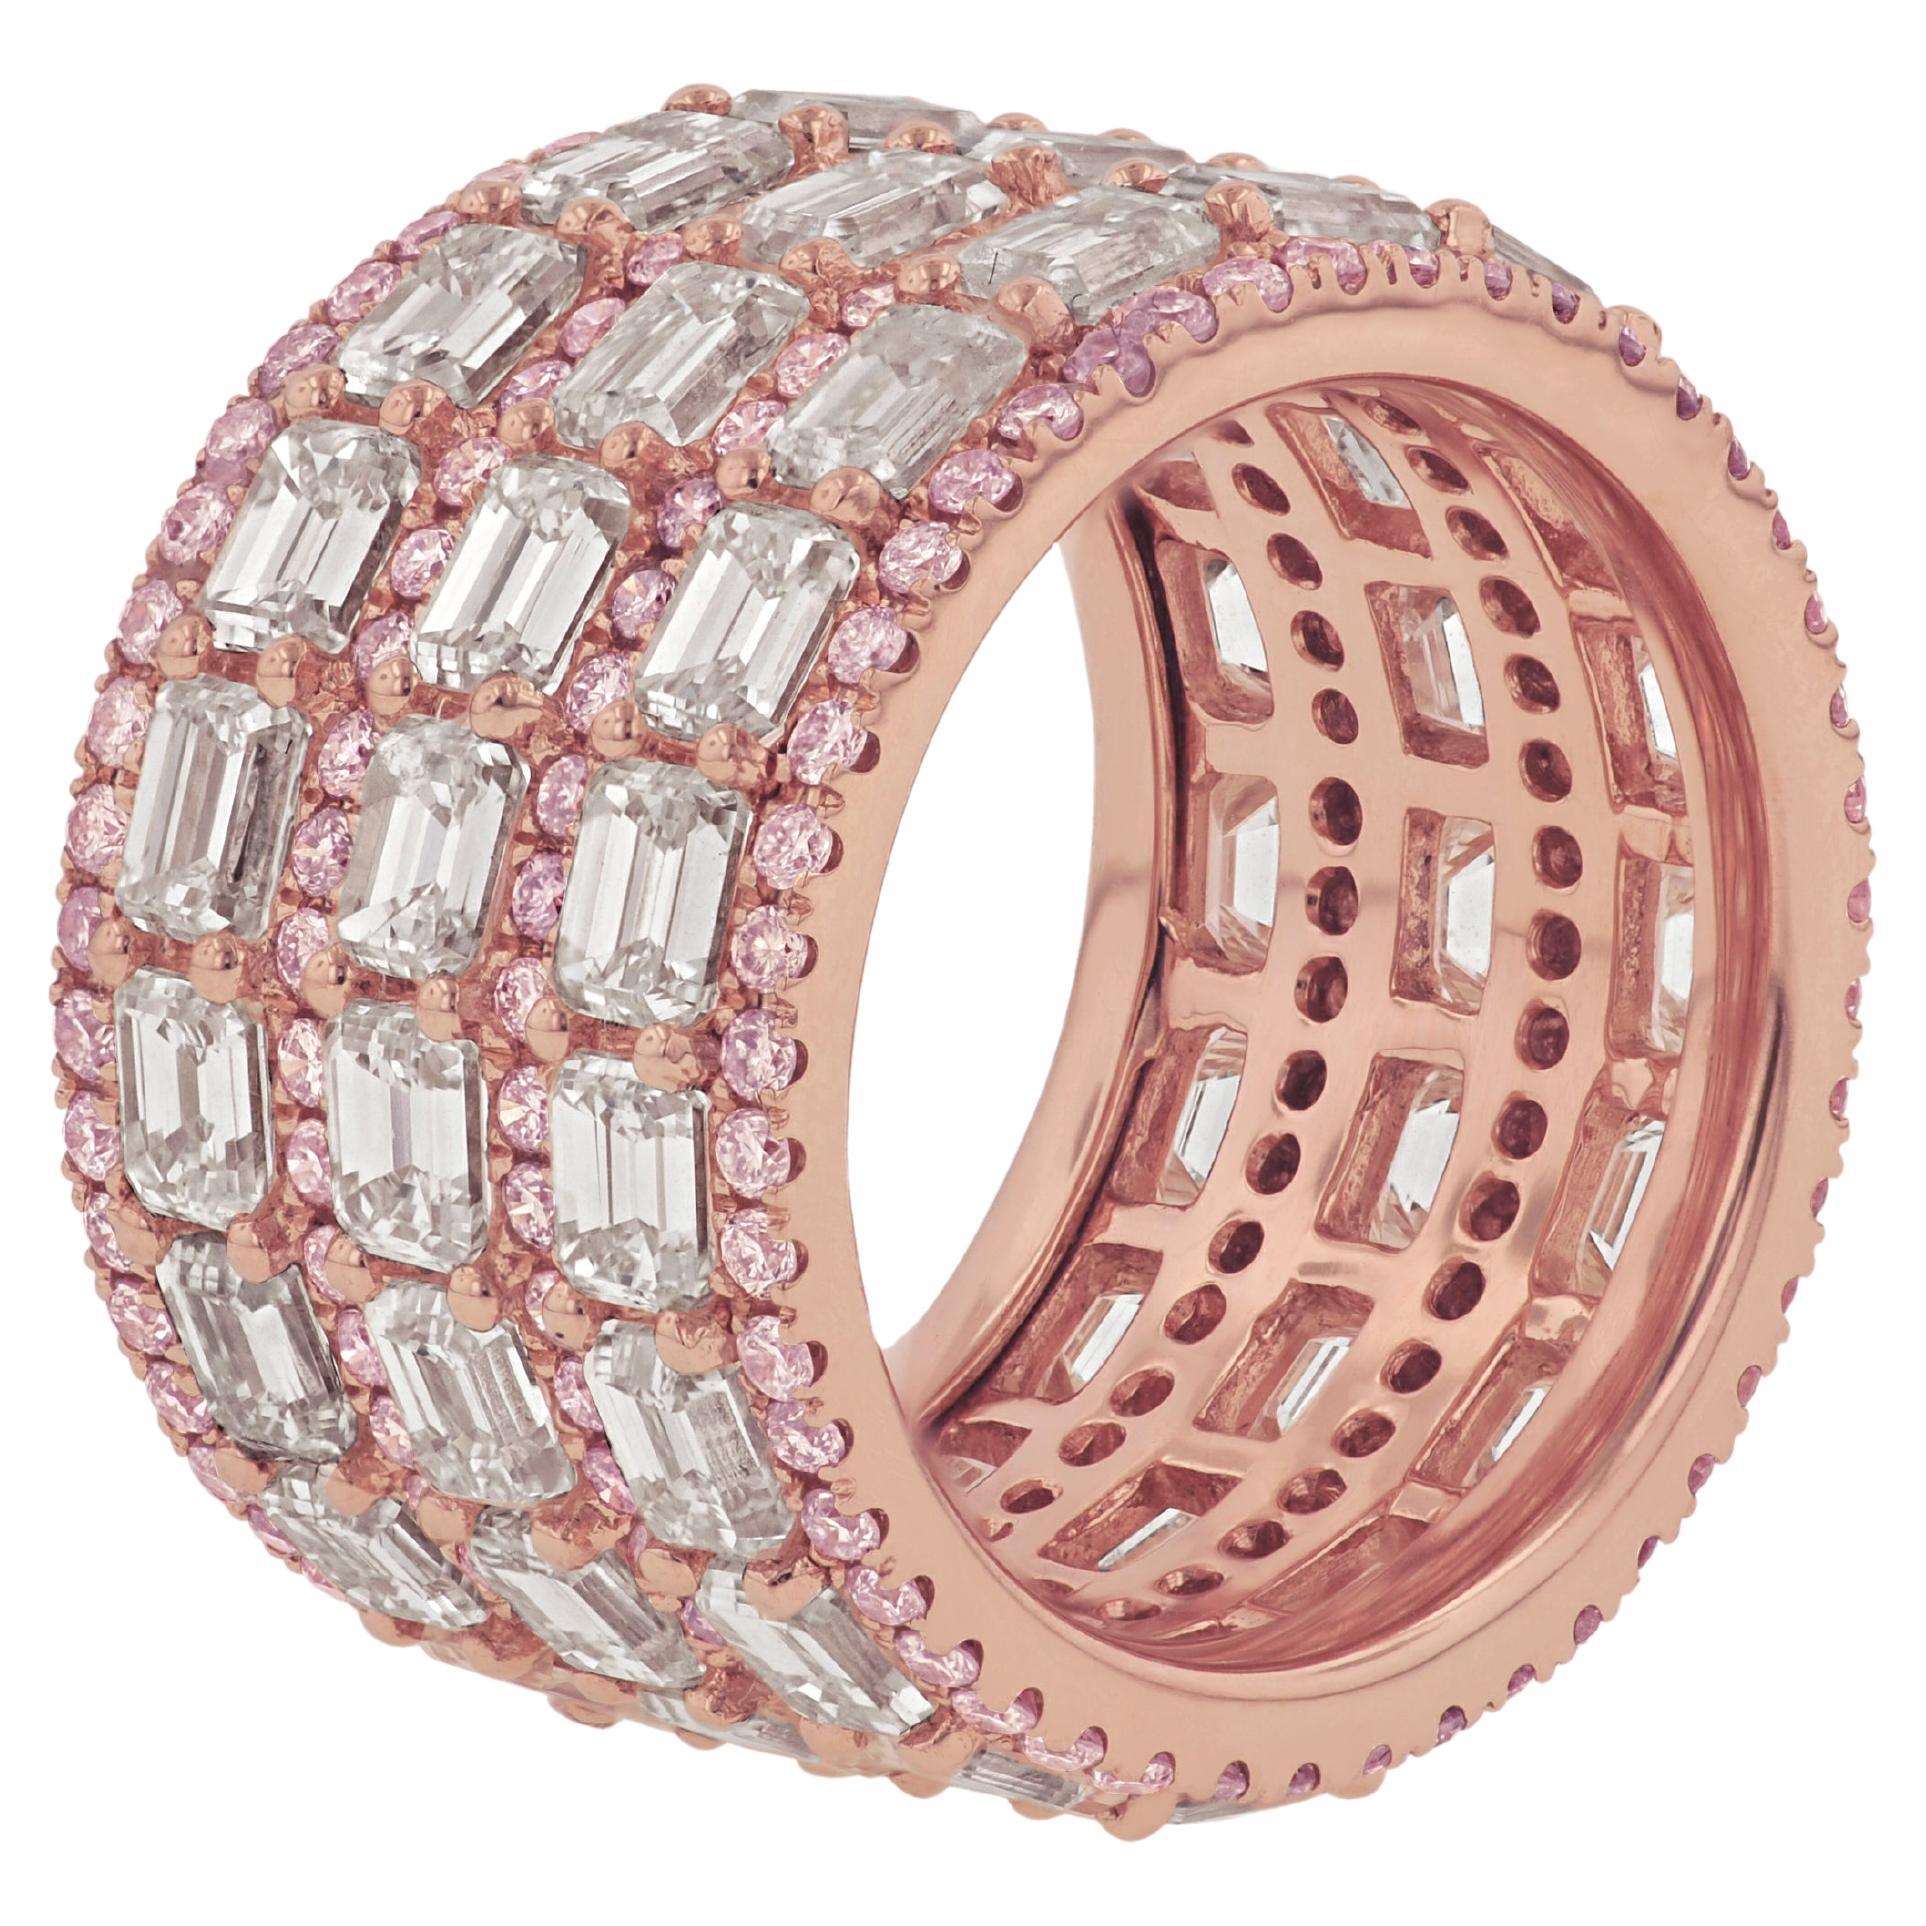 Diana M. 18 kt Rose Gold Eternity Band With 3 Rows Of Emerald Cut Diamonds